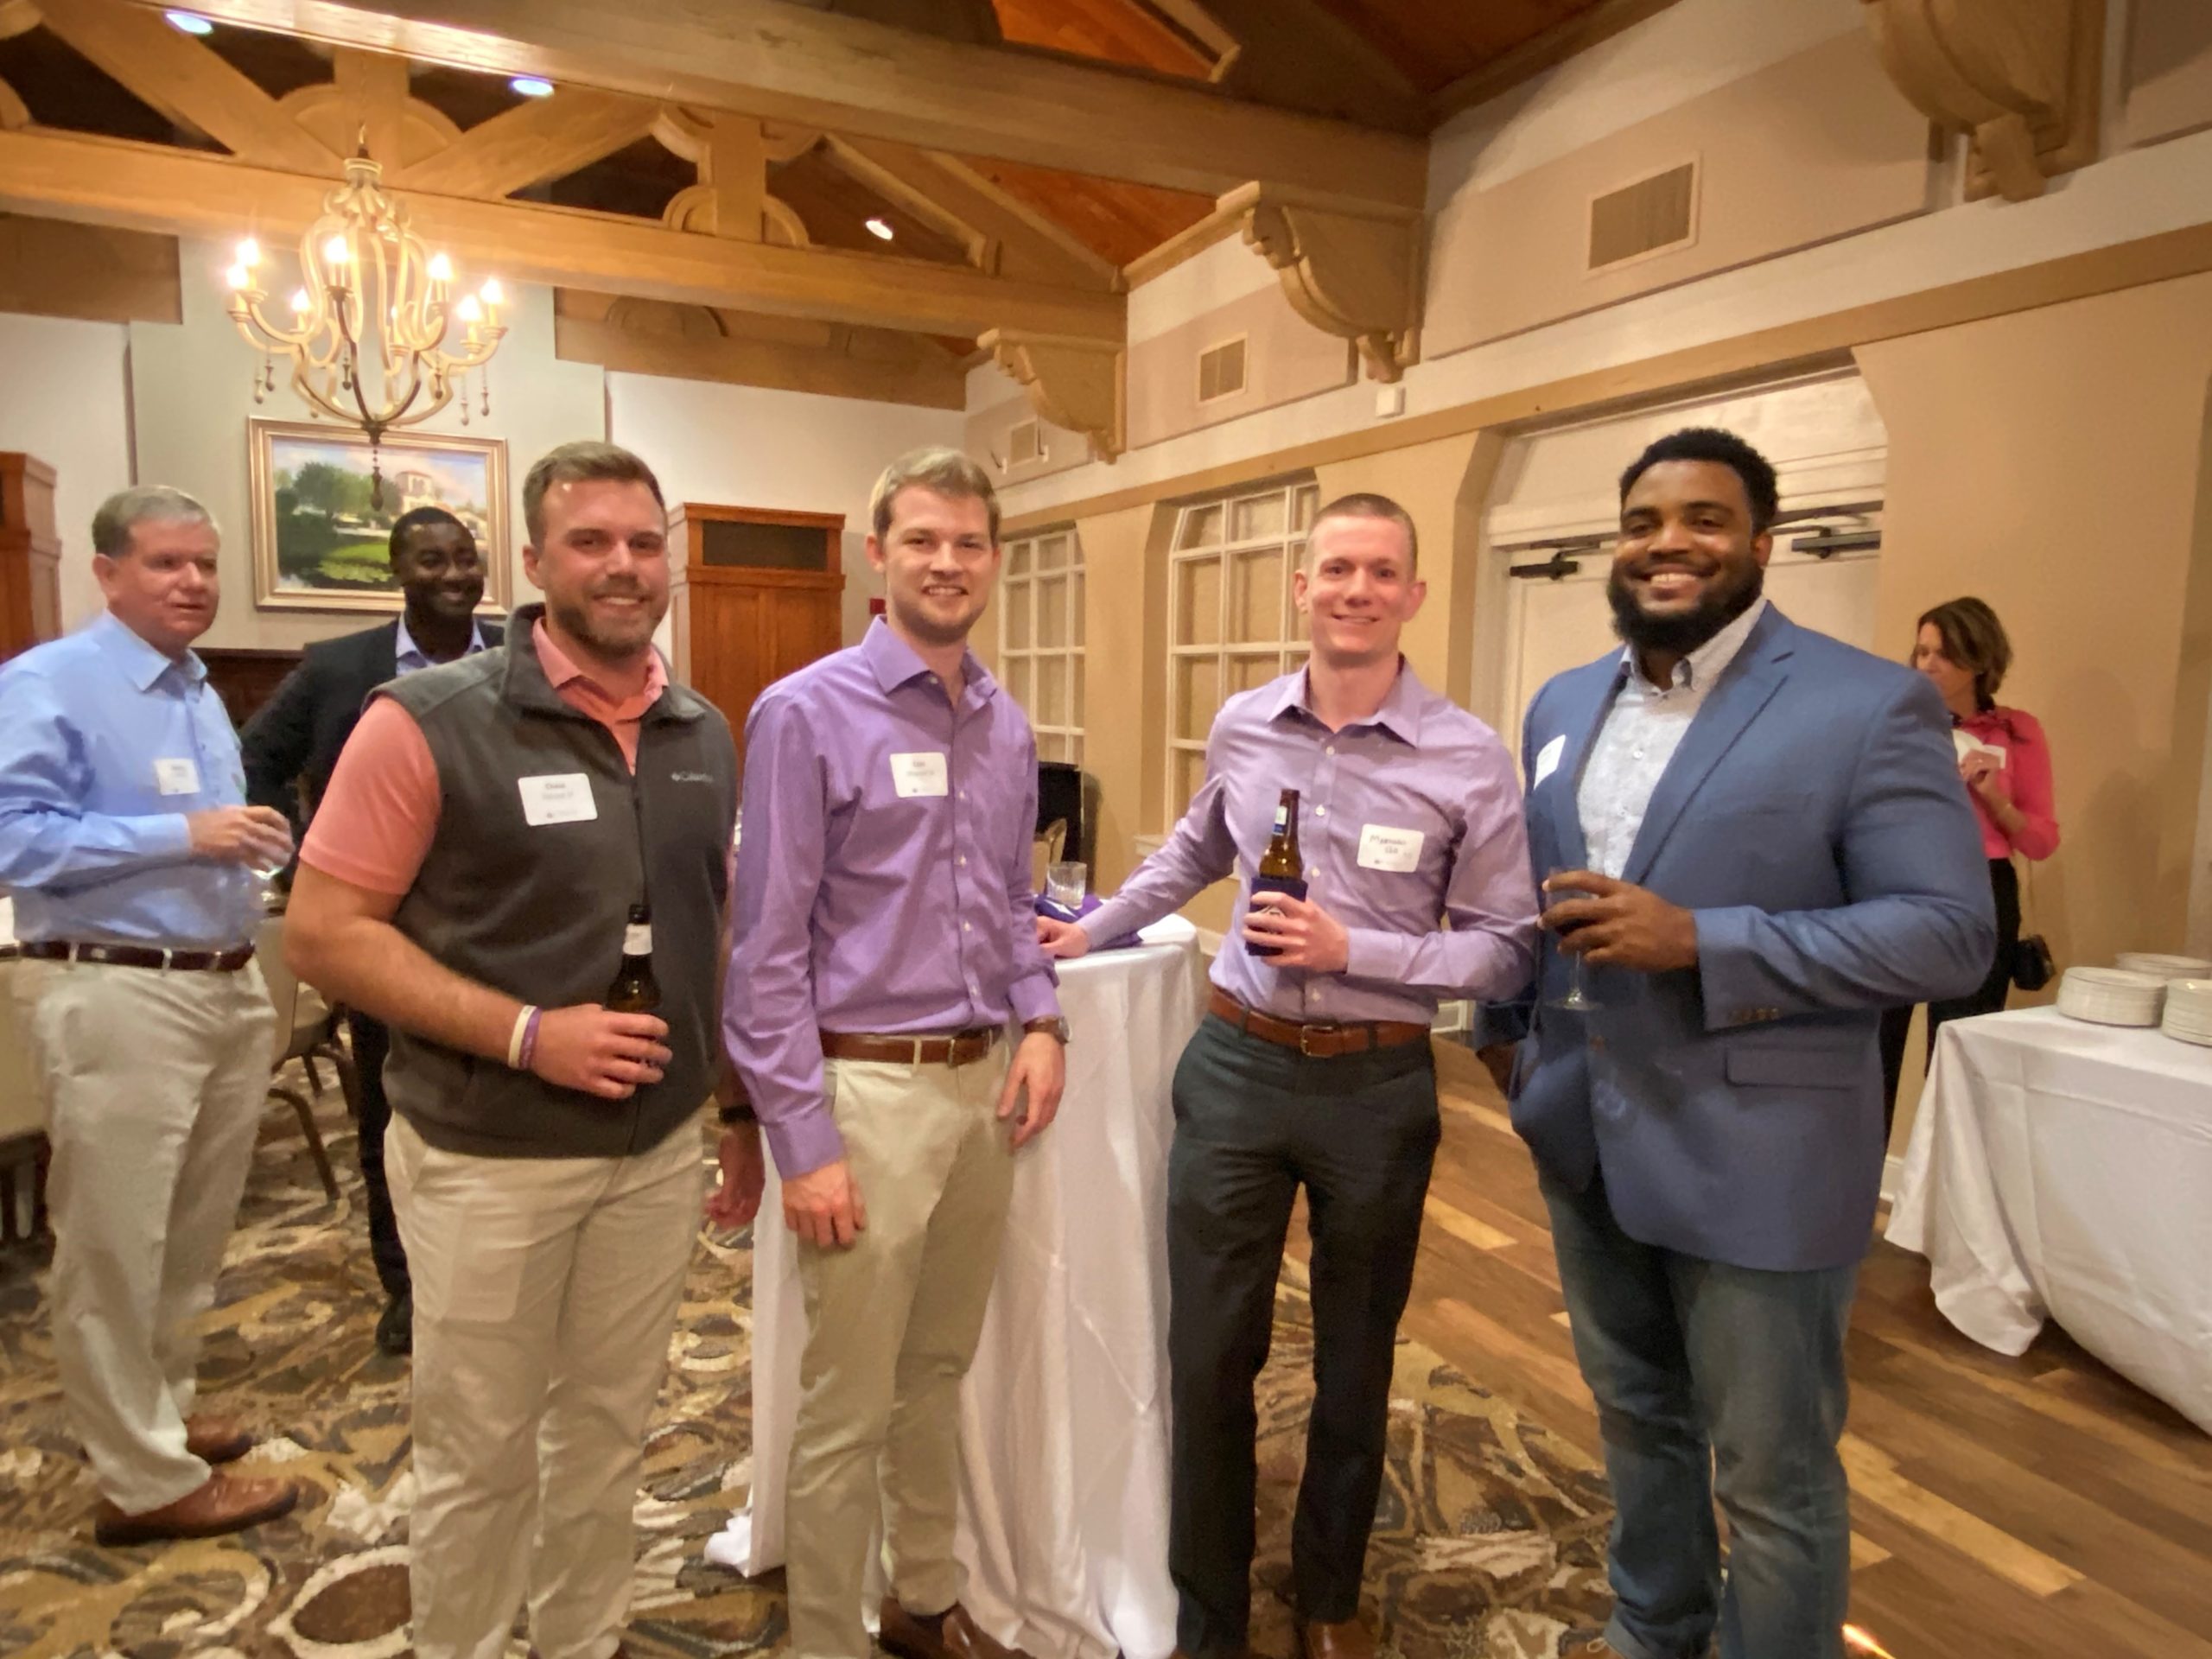 Alumni holding drinks at networking event